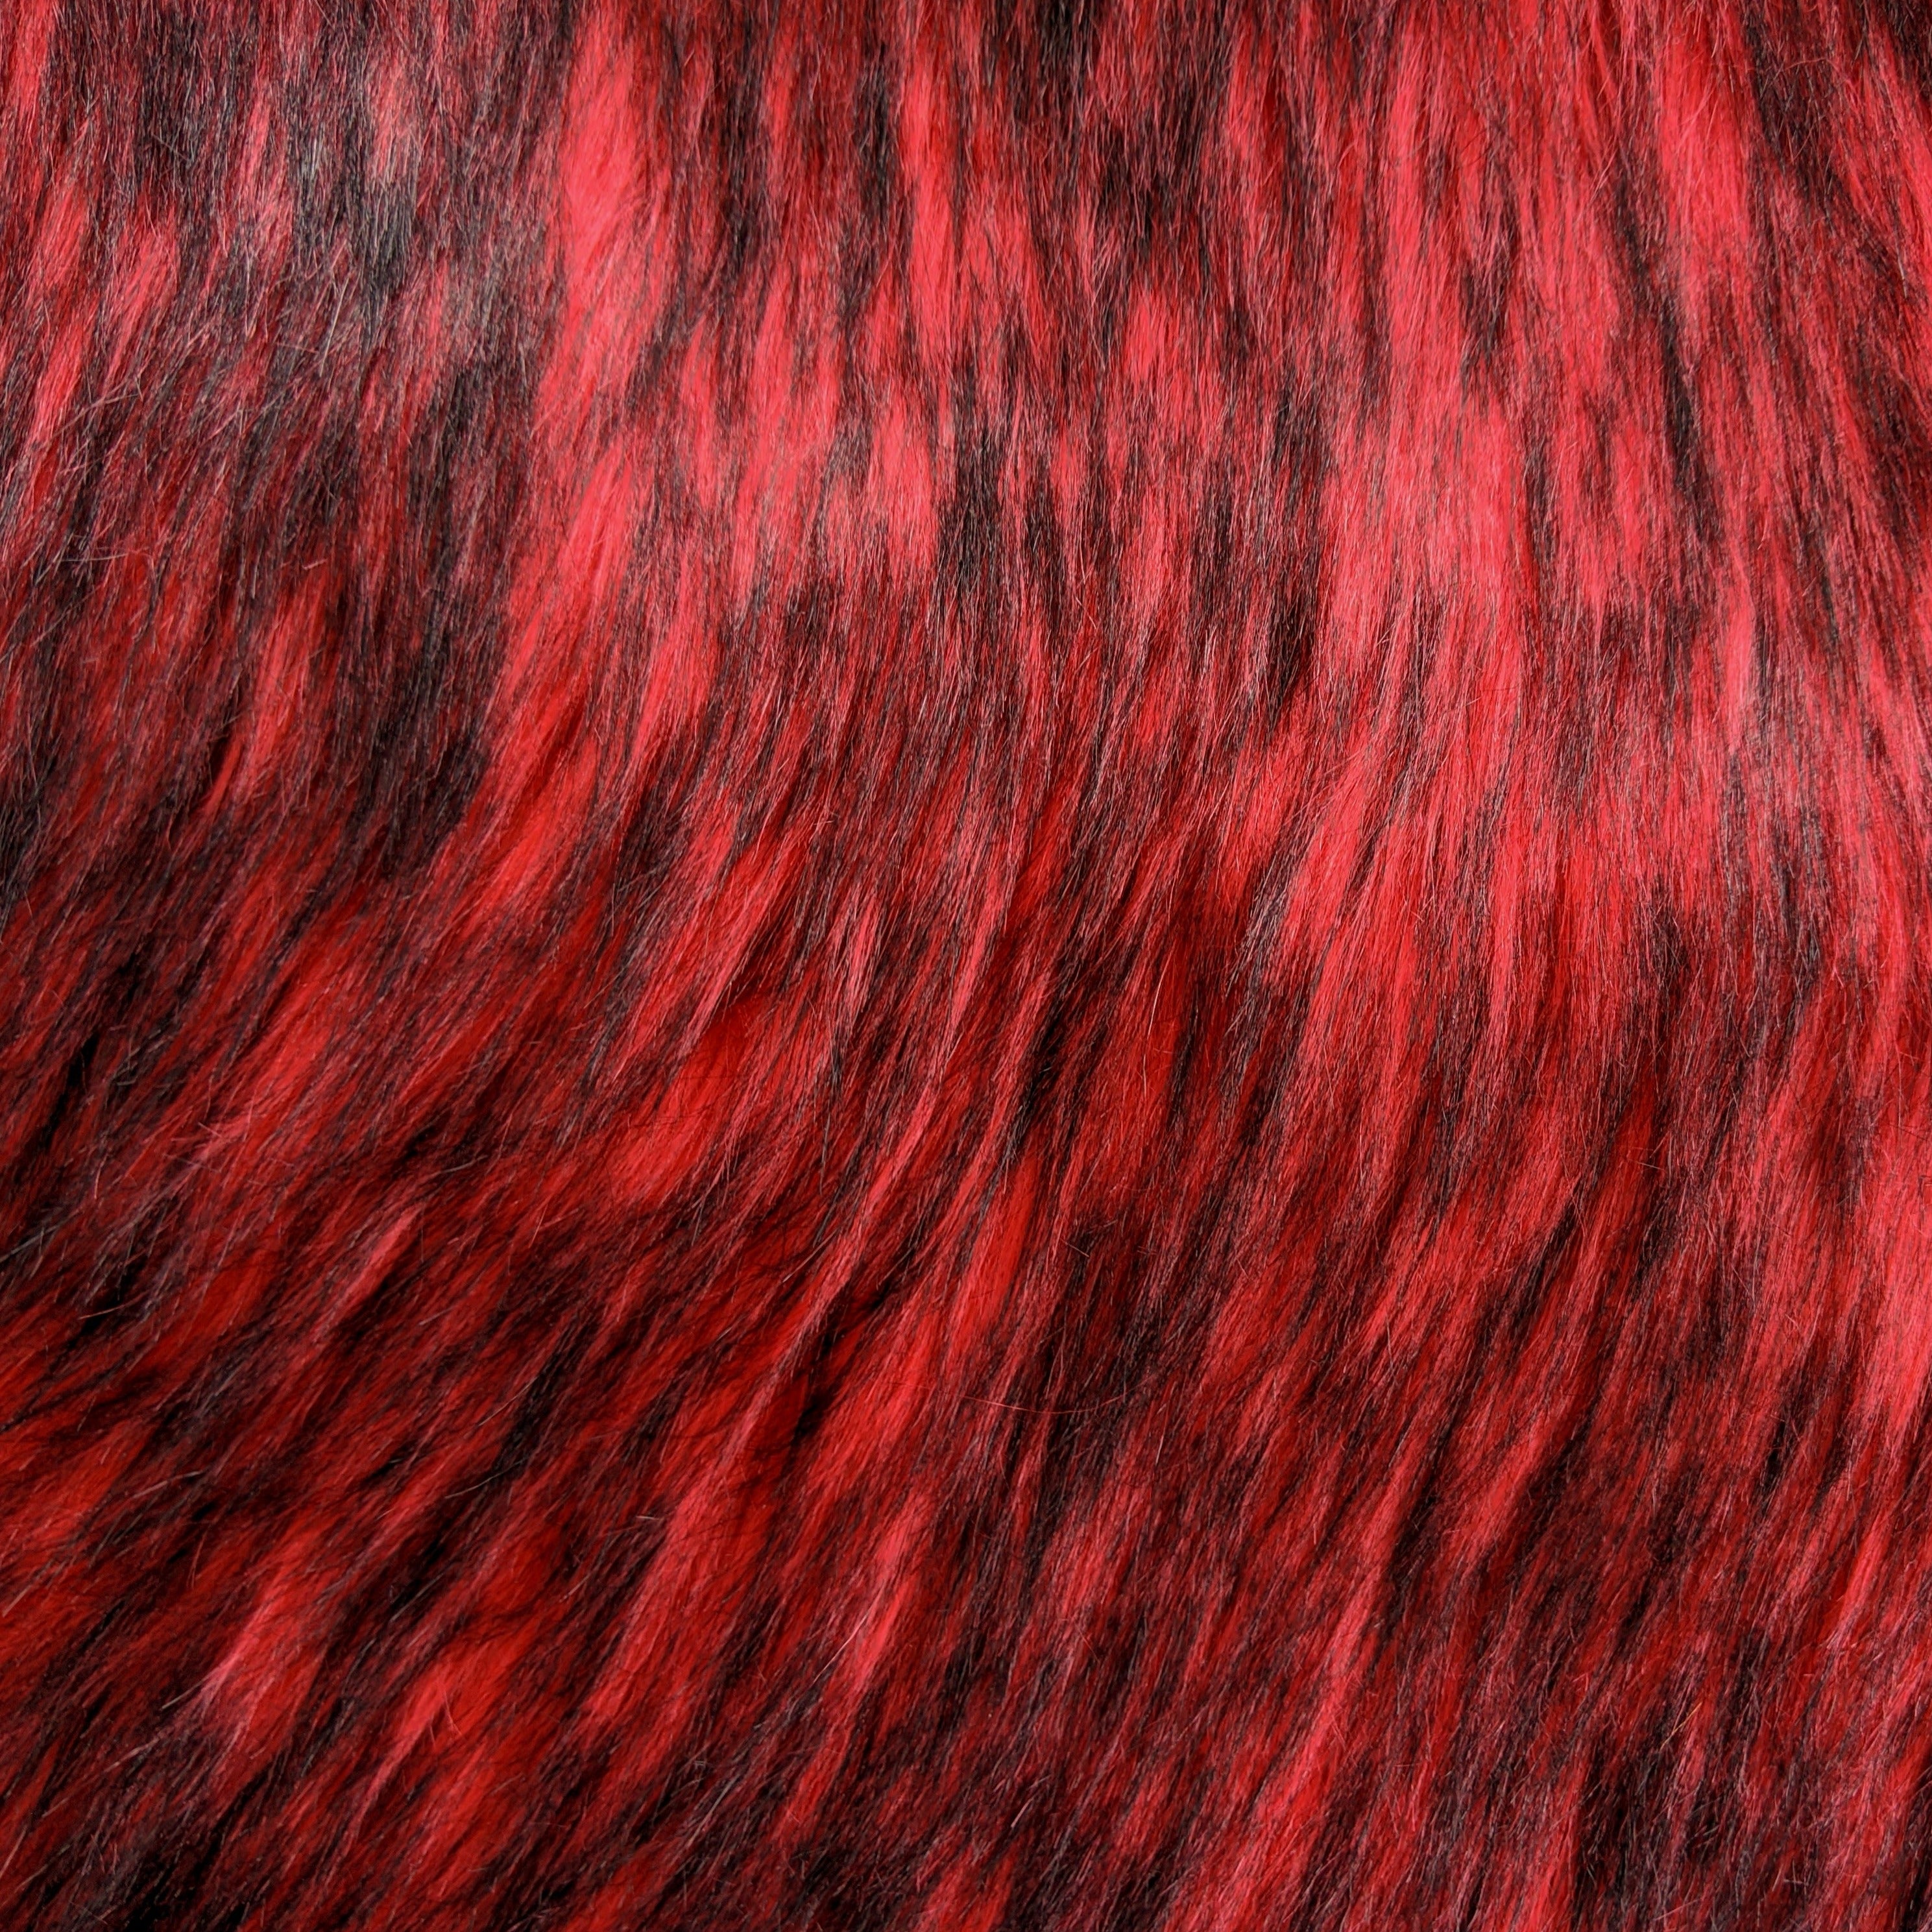 Long pile fire red faux fur fabric laid flat.